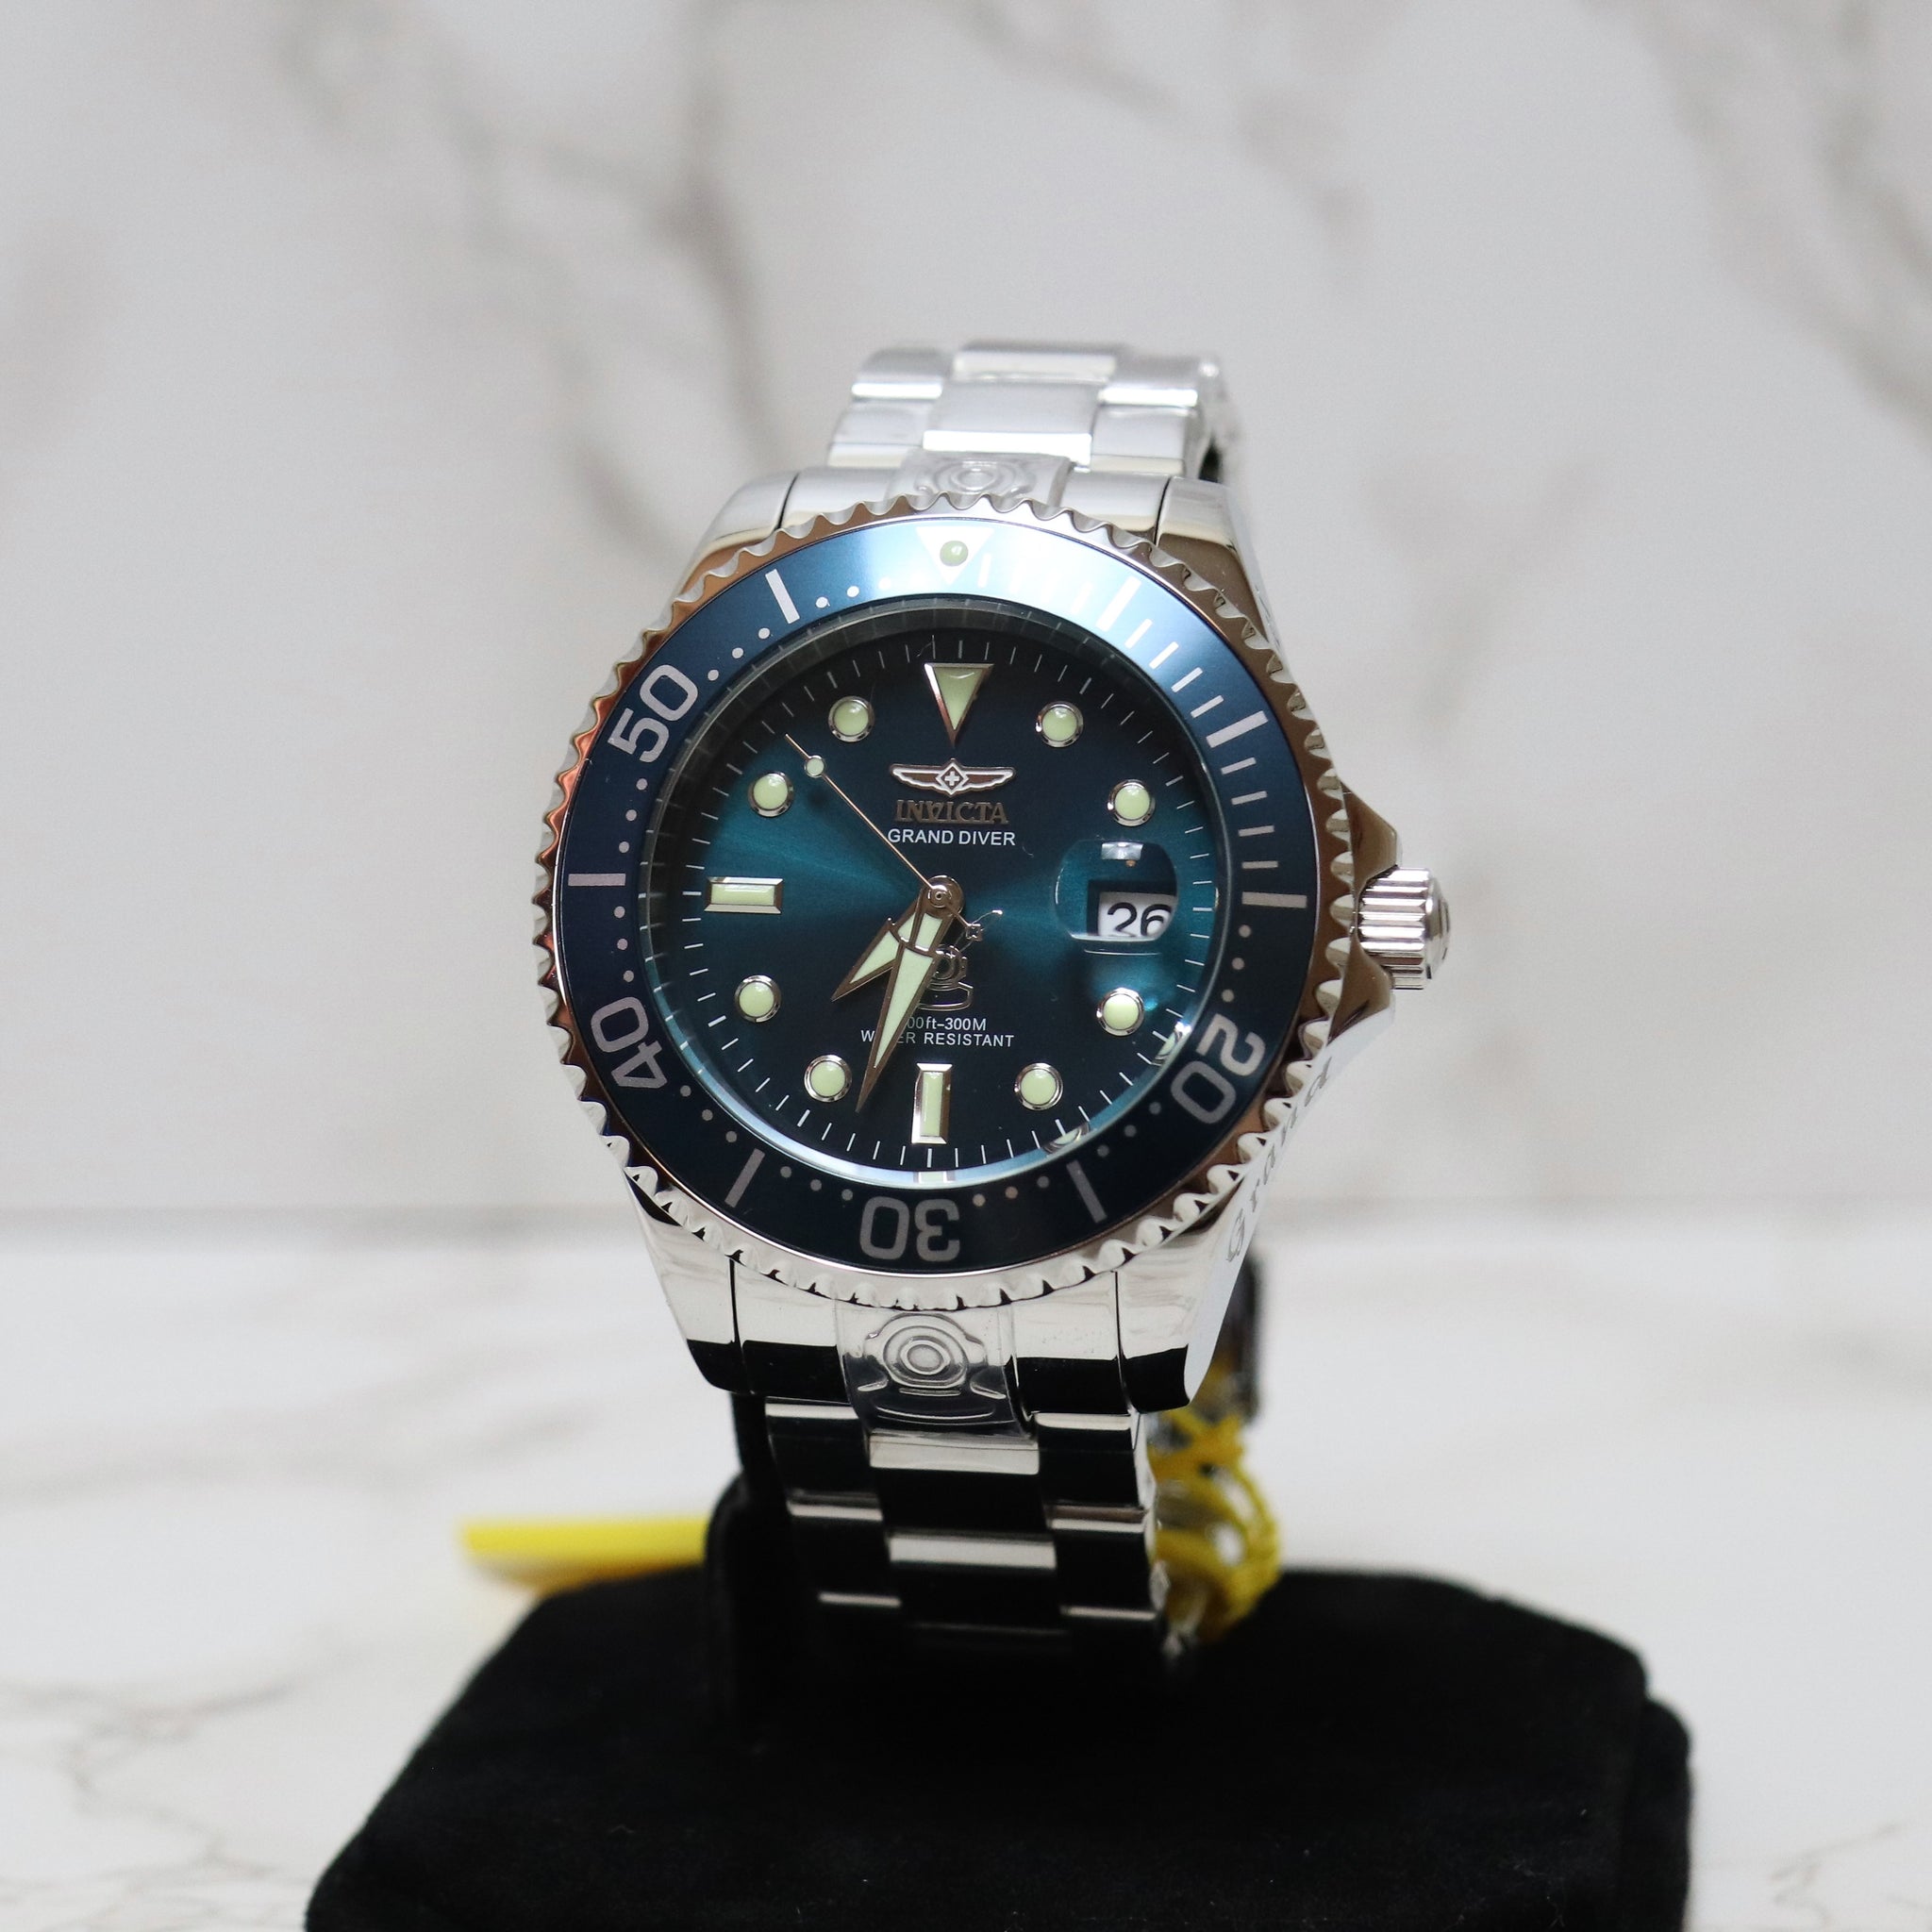 Invicta Grand Diver (18160) Automatic Watch – Ogham Timepieces